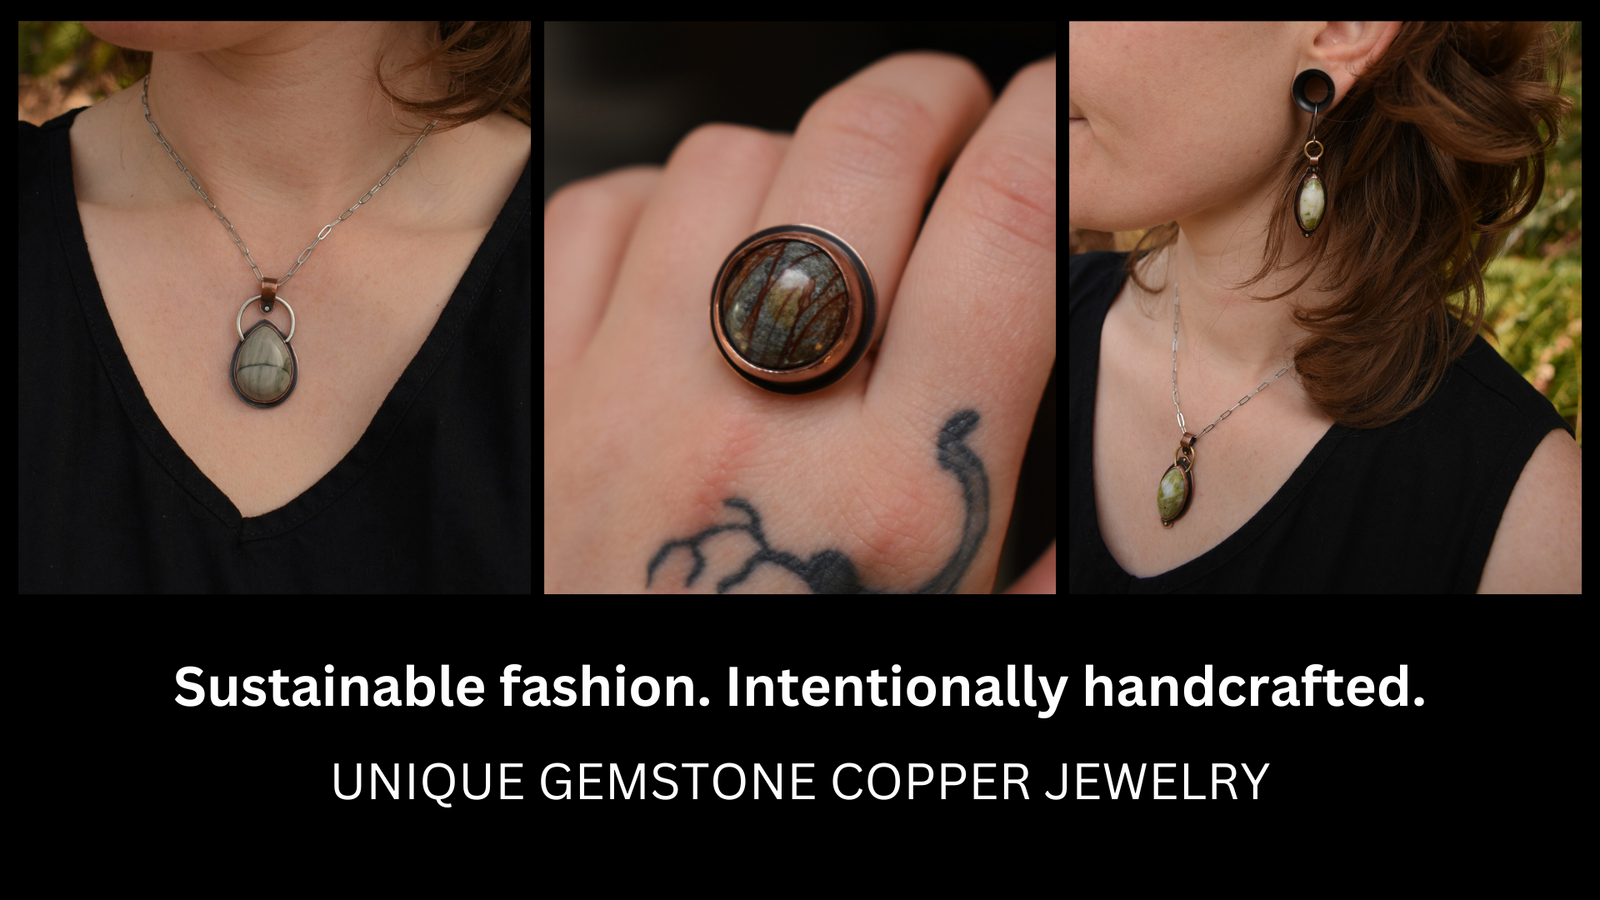 Sustainable fashion. Intentionally handcrafted. Unique gemstone copper jewelry by Woodland Metalsmith.